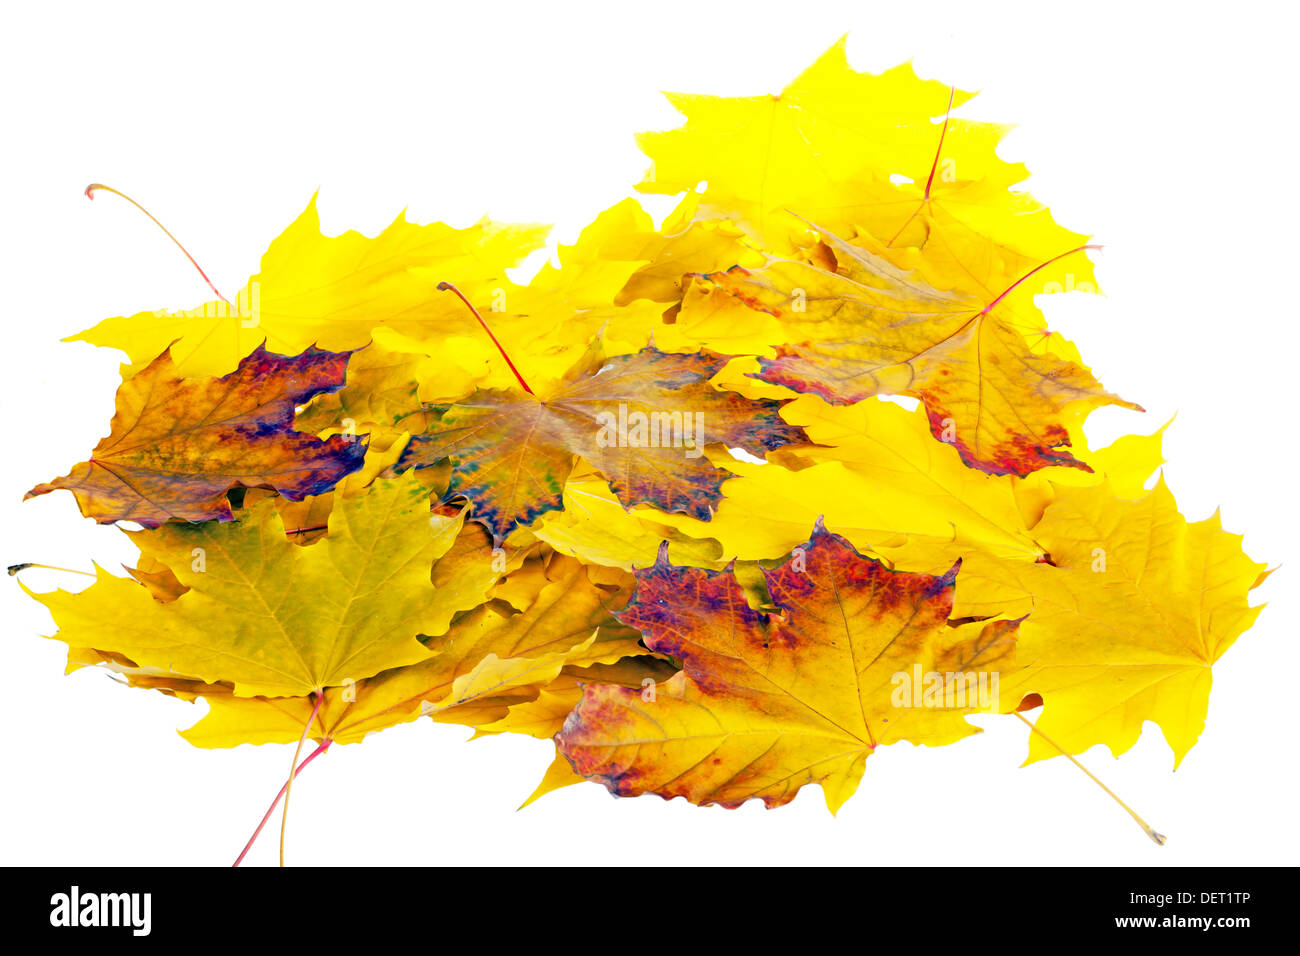 Heap of autumn leaves isolated on white background Stock Photo